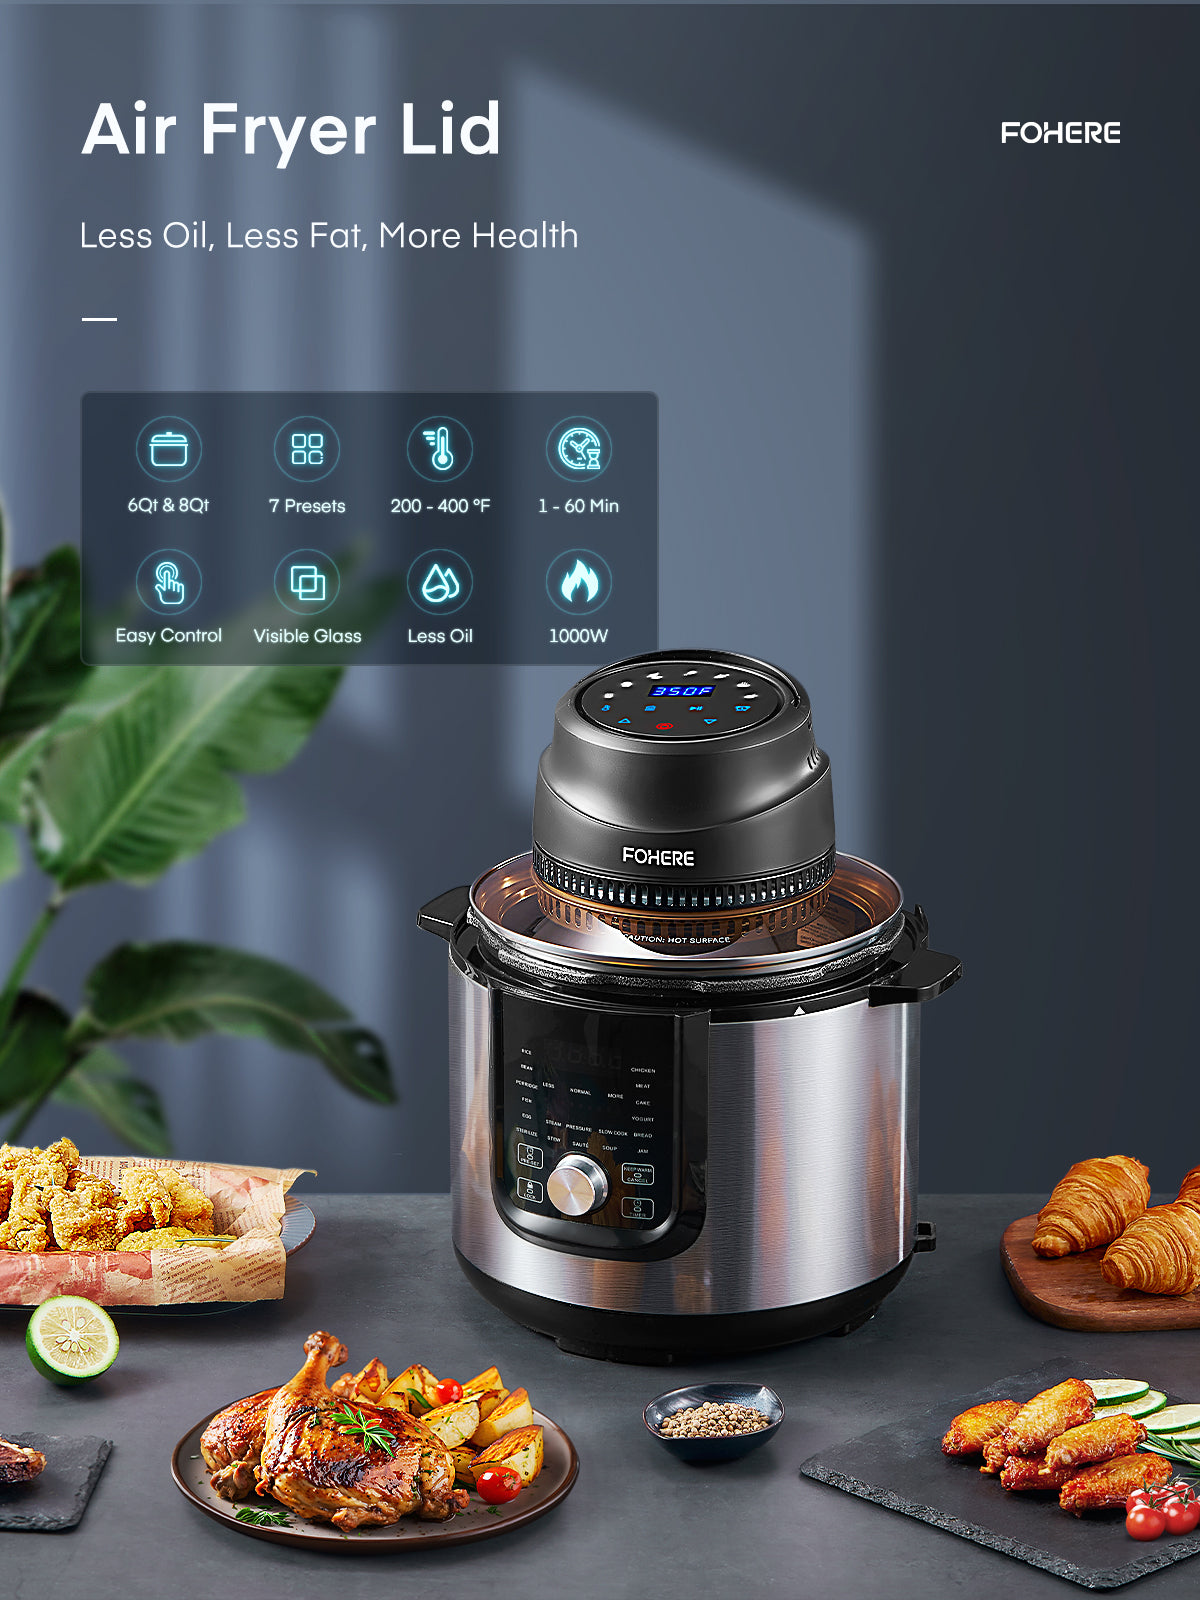 FOHERE Air Fryer Lid 7-in-1 for Instant Pot 6&8 Qt, Crisp Lid Touchscreen, Turn Your Pressure Cooker Into Air Fryer in Seconds, Accessories and Recipe Cookbook Included